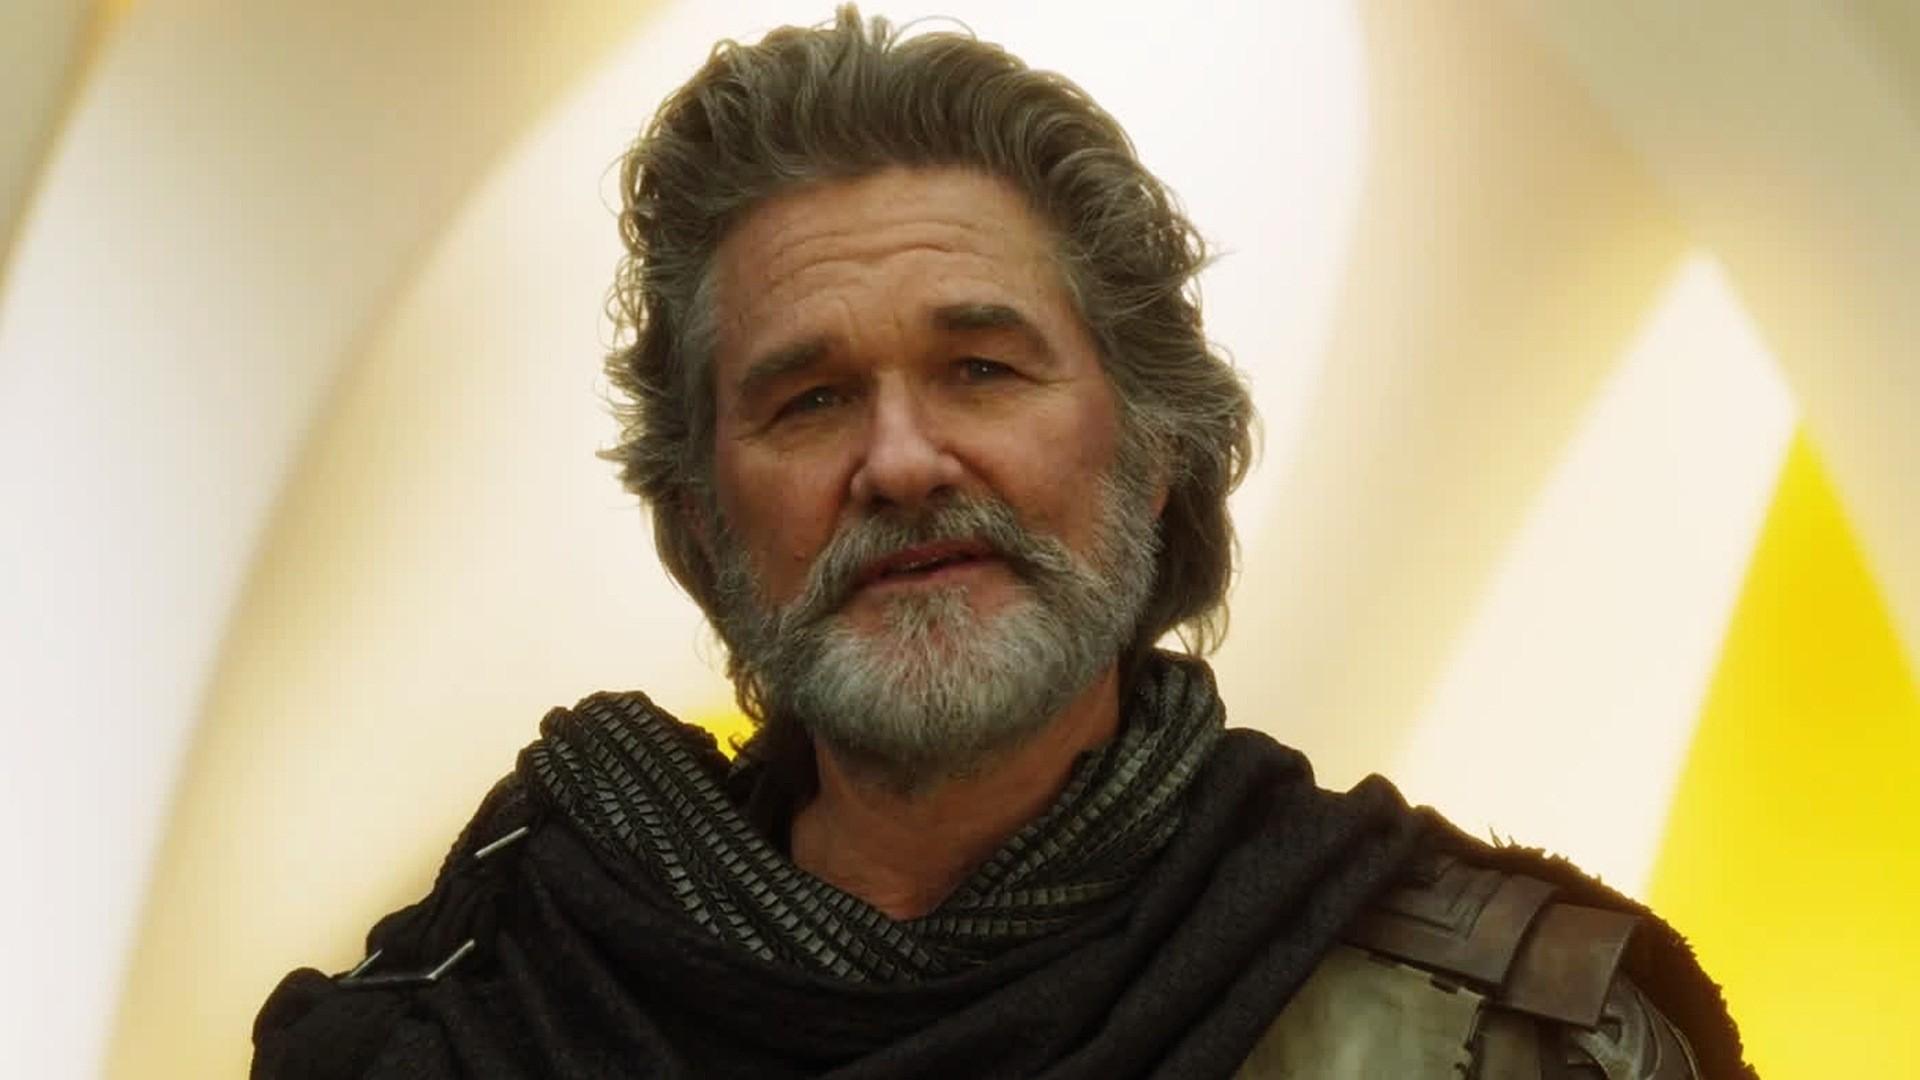 Kurt Russell Ego The Living Planet Guardians Of The Galaxy Vol. 2